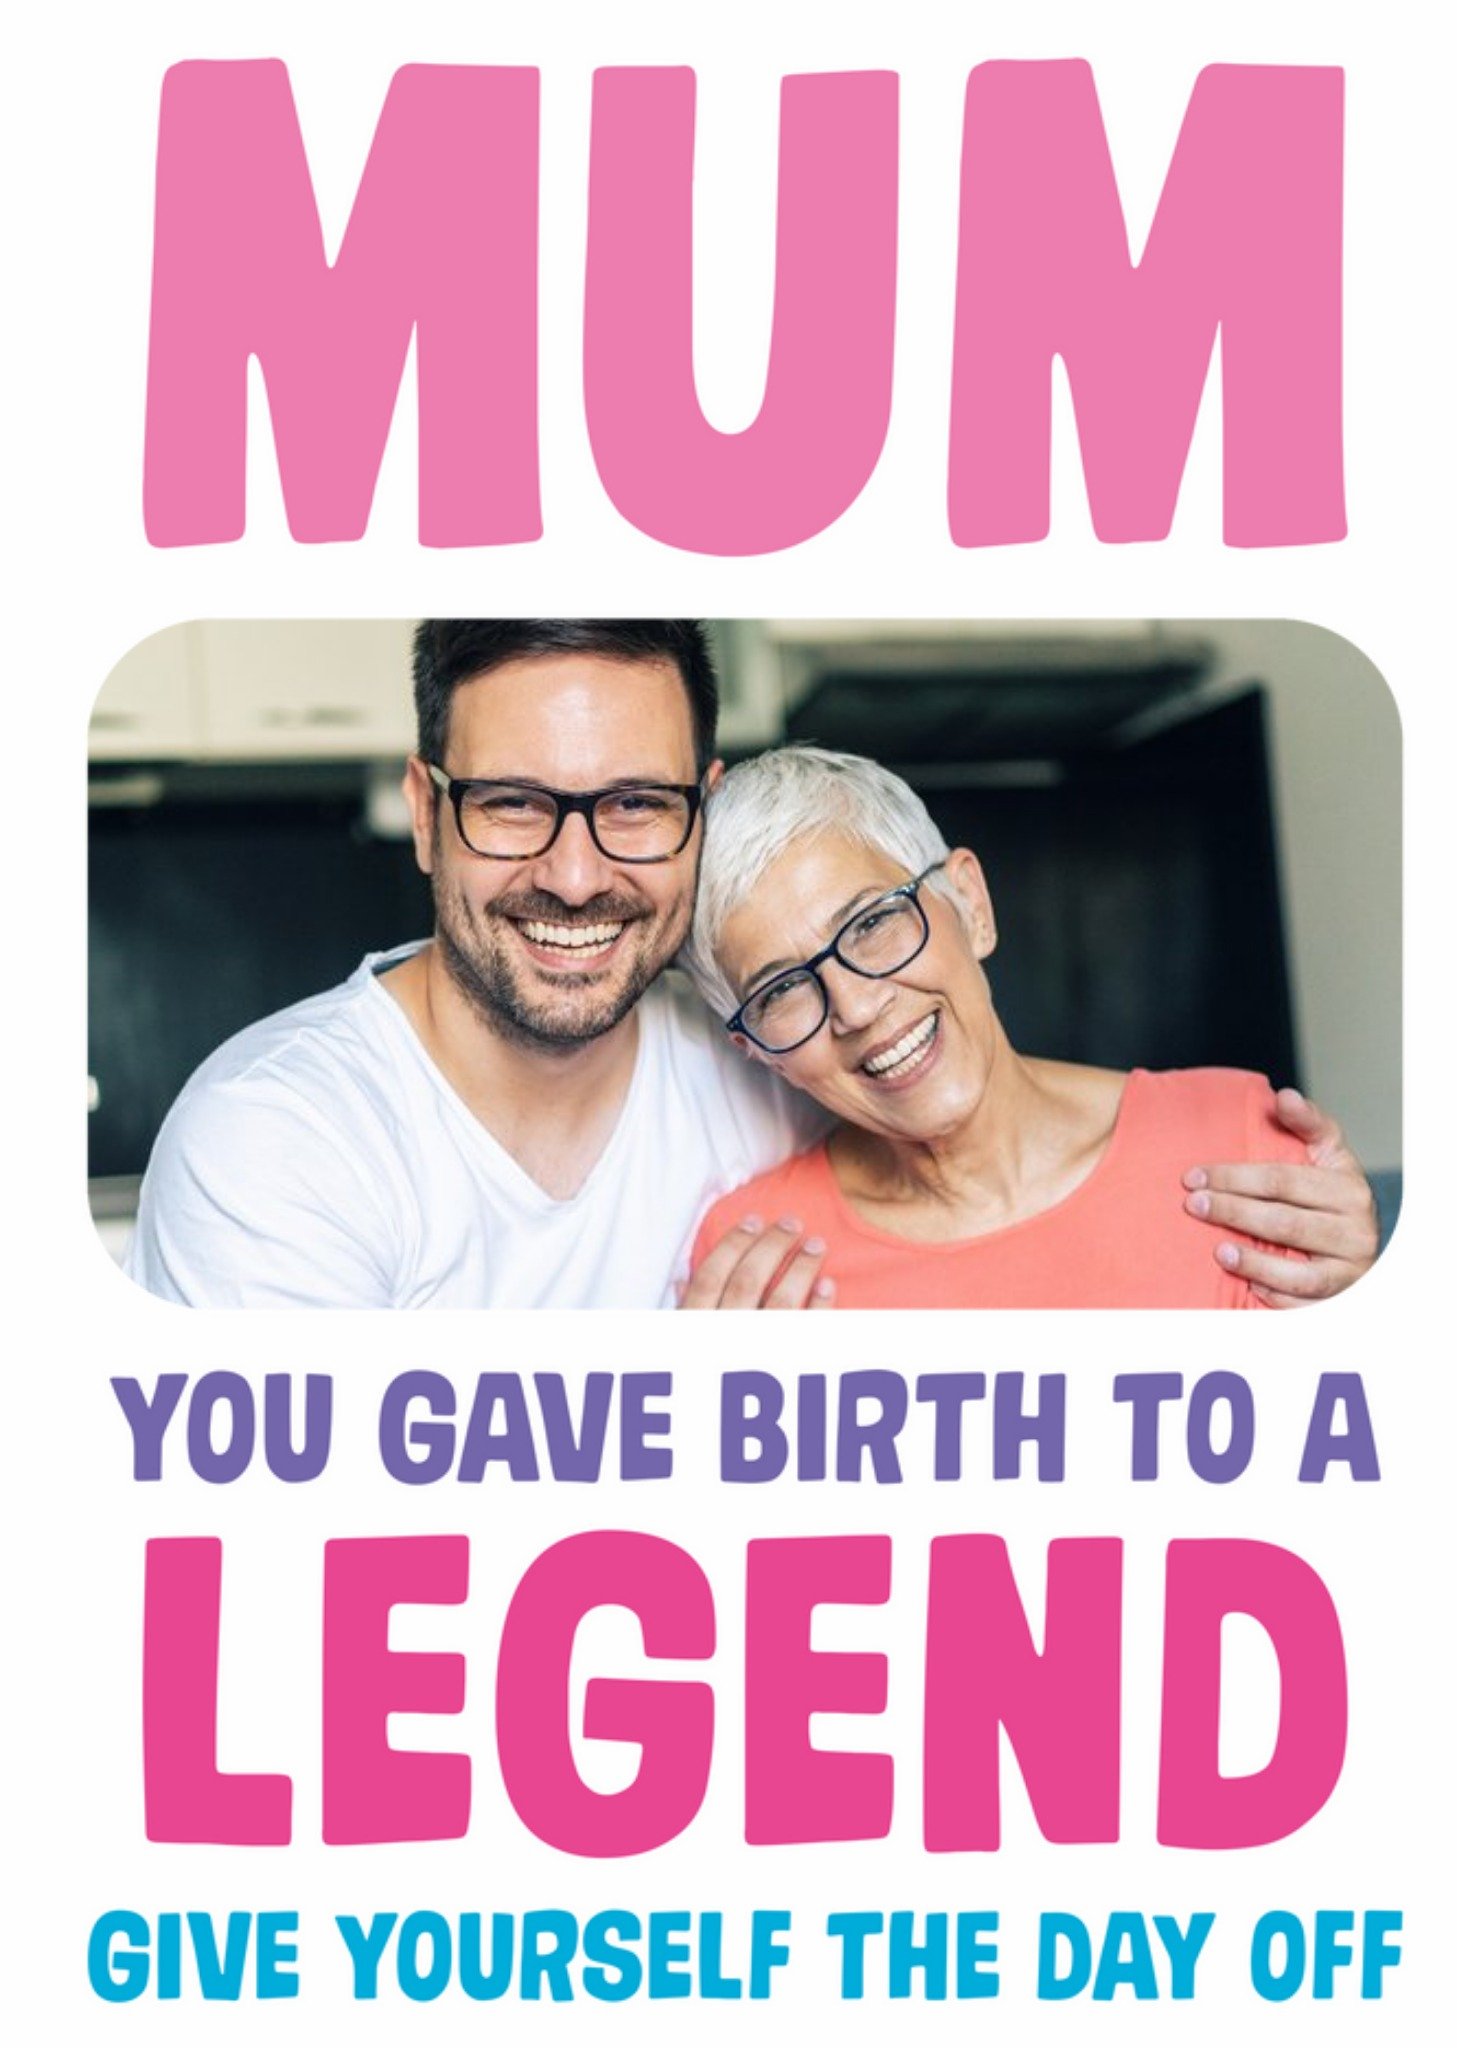 Moonpig Funny Mum You Gave Birth To A Legend Photo Upload Birthday Card, Large